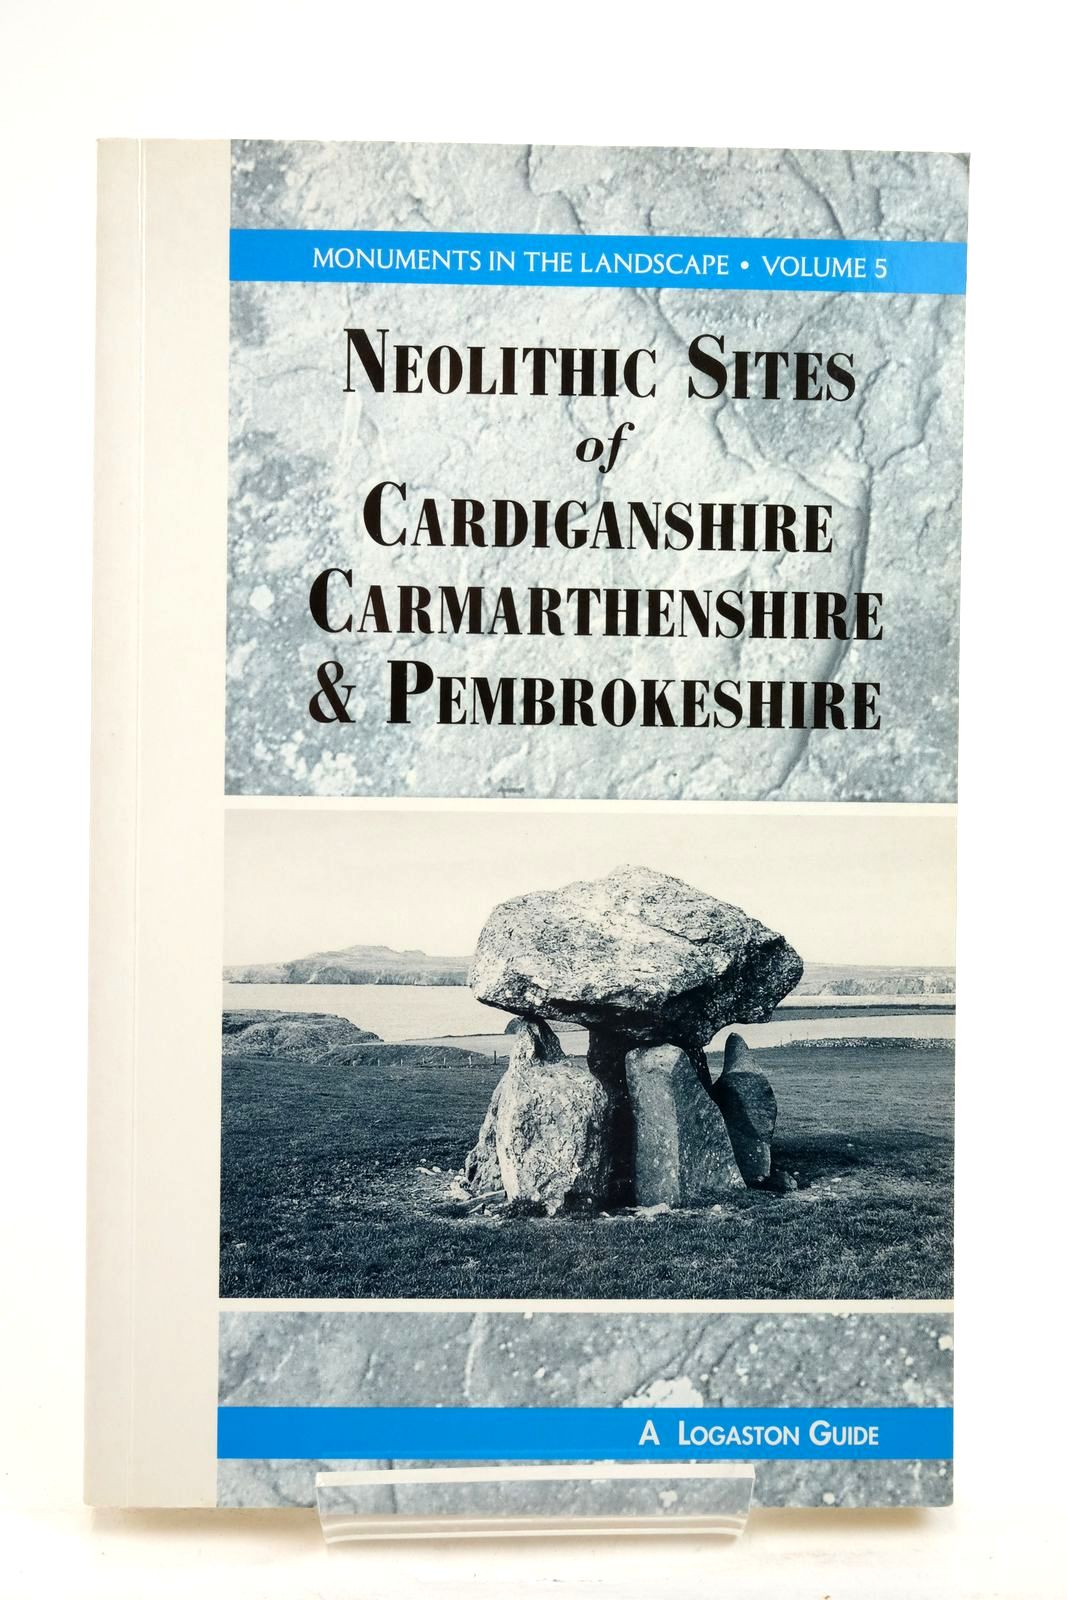 Photo of THE ANTHROPOLOGY OF LANDSCAPE: A GUIDE TO THE NEOLITHIC SITES IN CARDIGANSHIRE, CARMARTHENSHIRE & PEMBROKESHIRE written by Children, George
Nash, George published by Logaston Press (STOCK CODE: 2137102)  for sale by Stella & Rose's Books